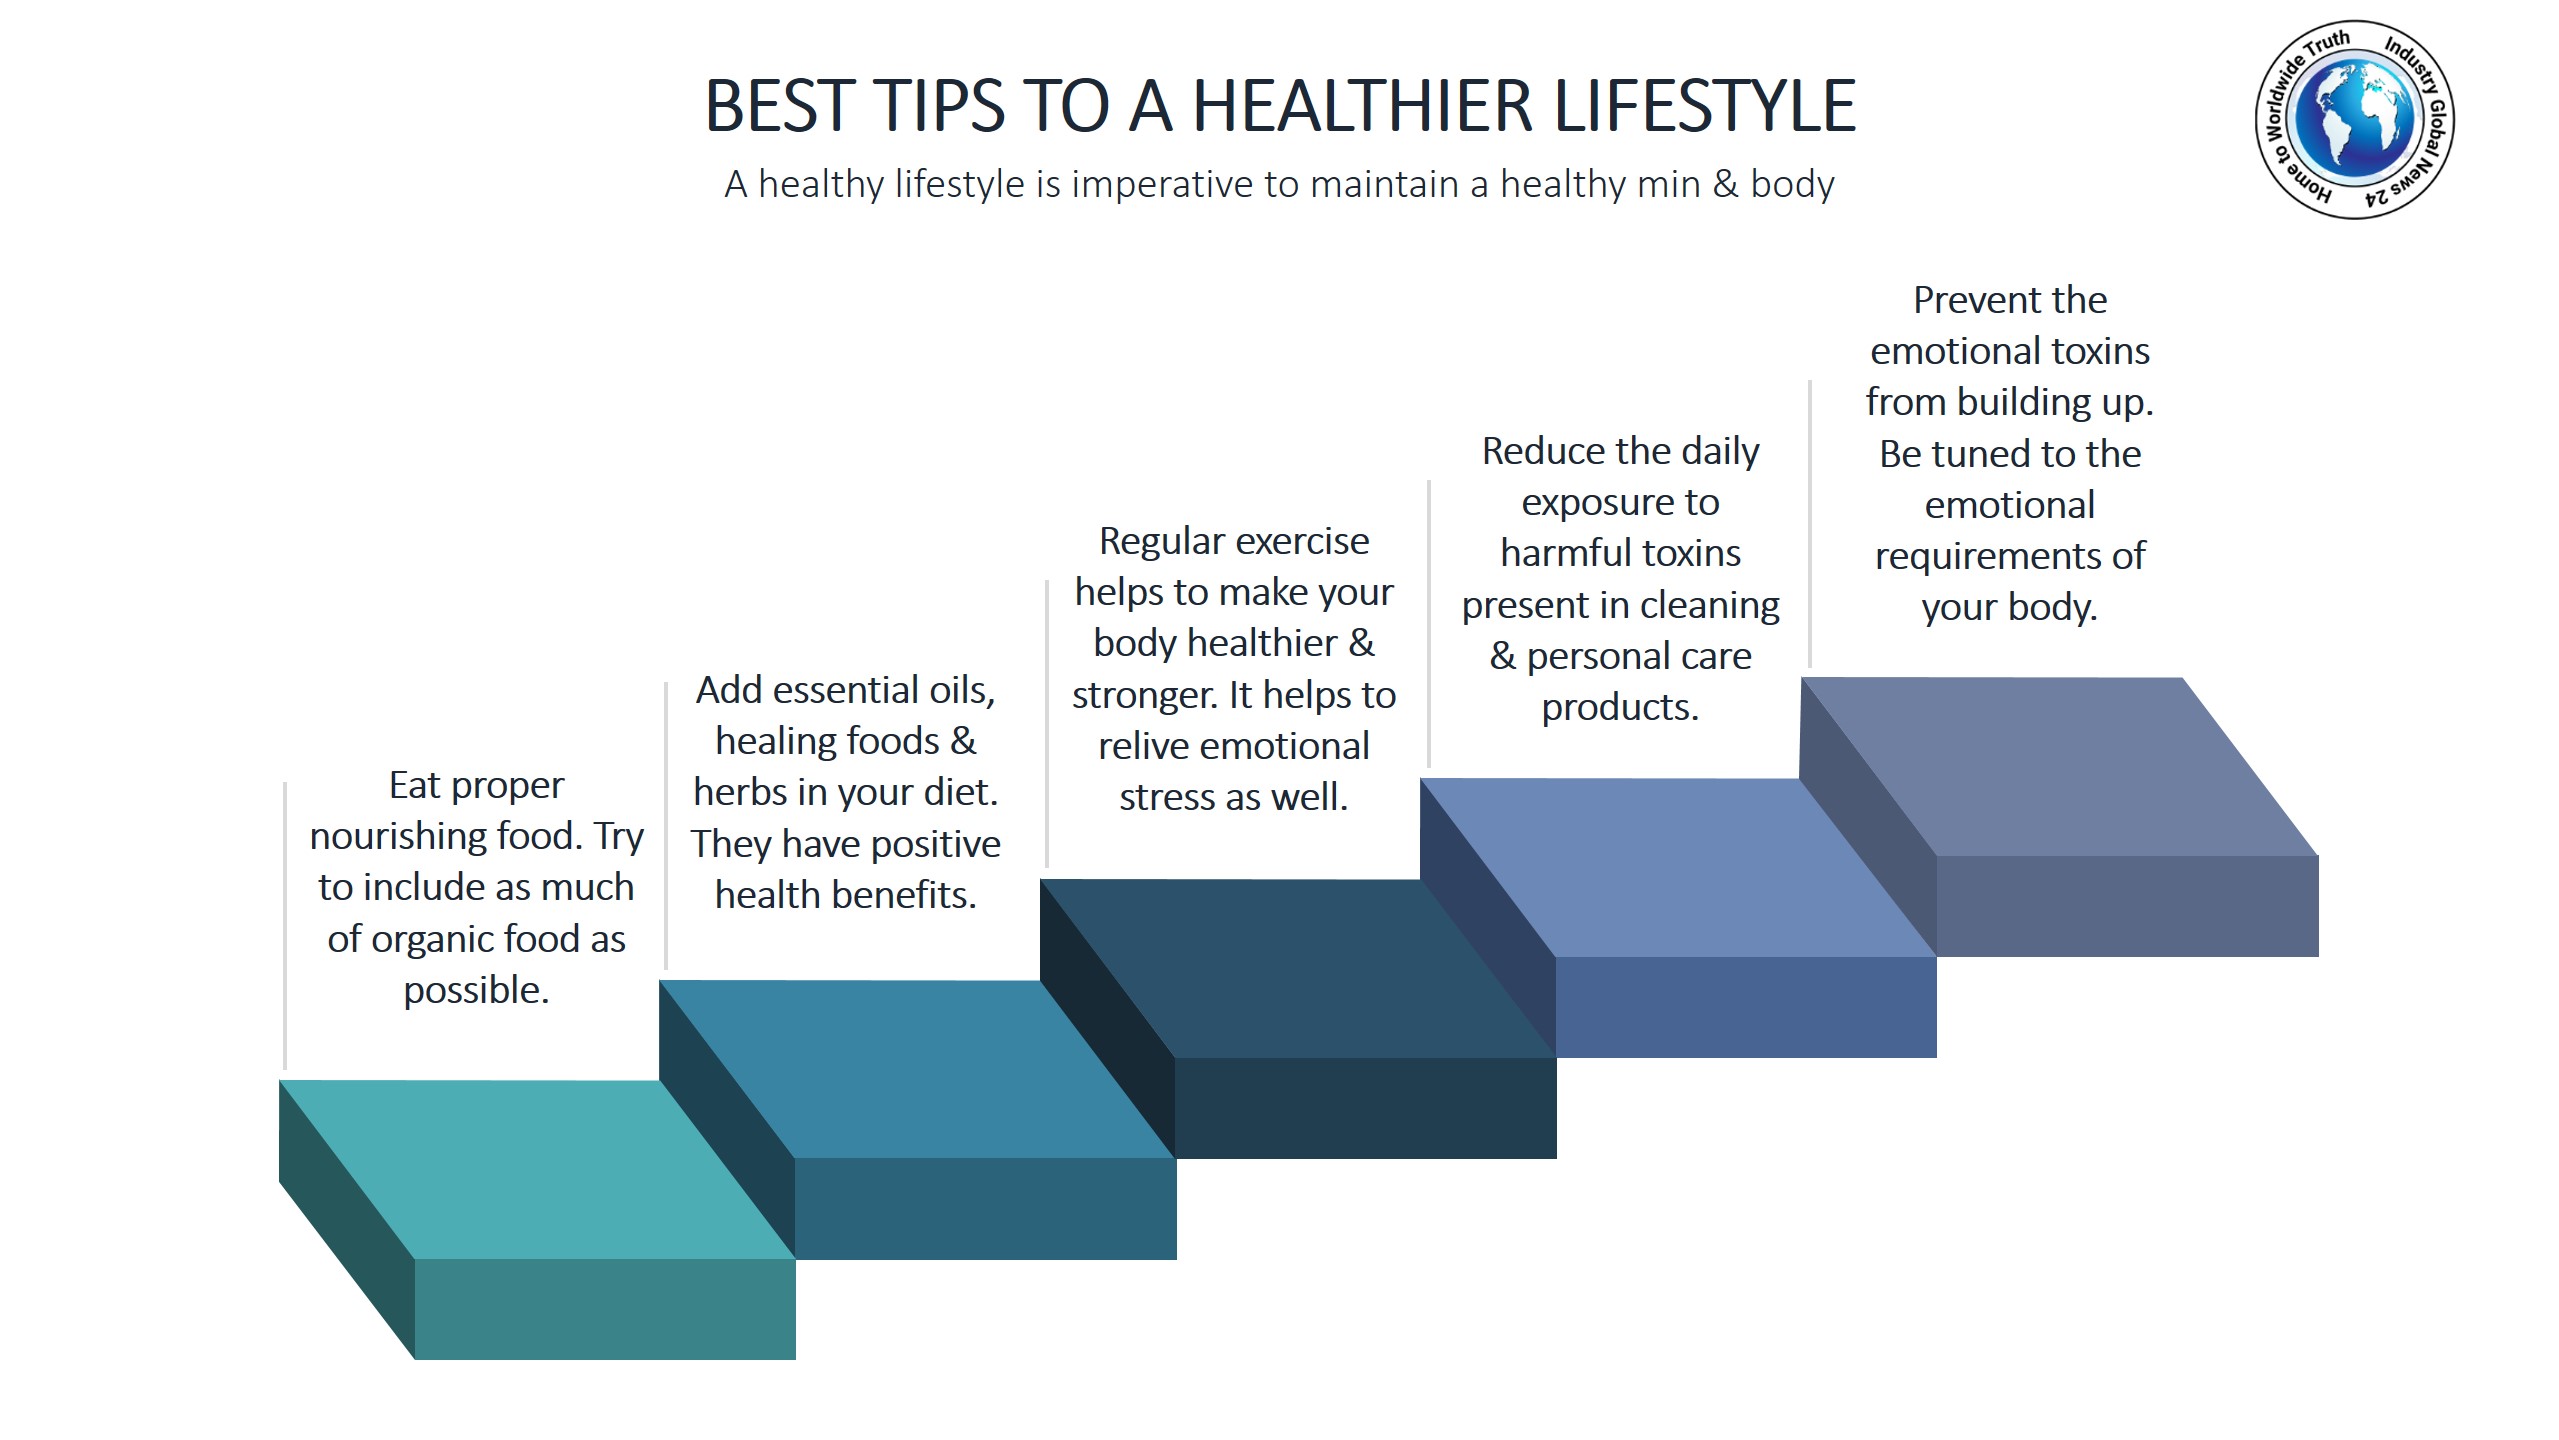 Best tips to a healthier lifestyle